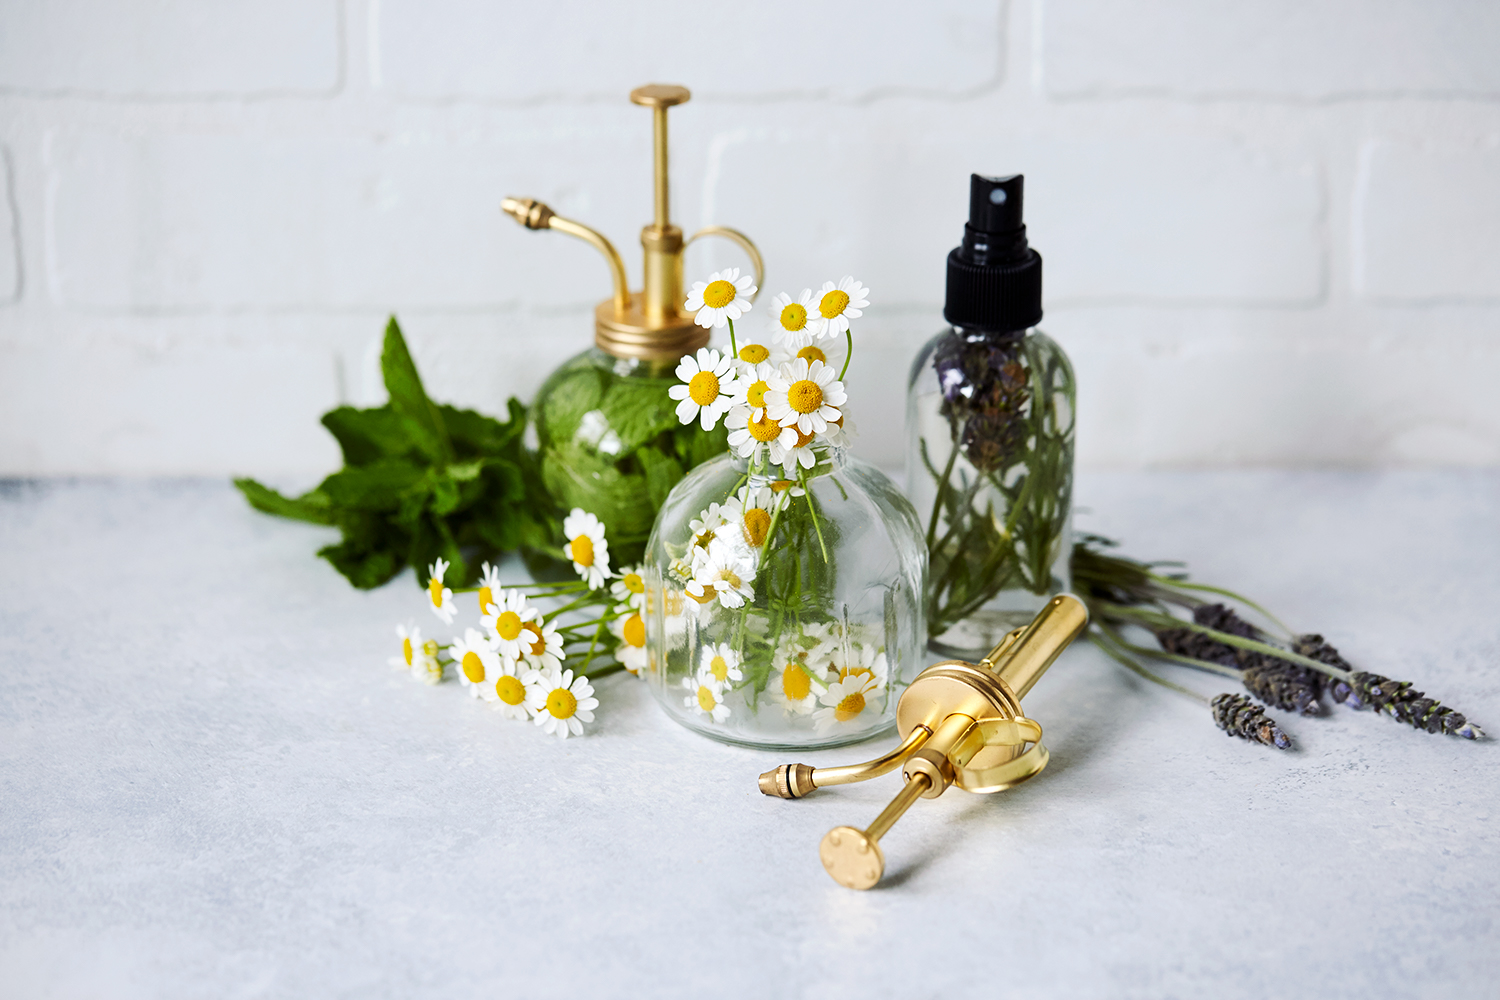 How-to Refresh and Hydrate Your Skin with Homemade Infused Face Mists - Tasty Yummies